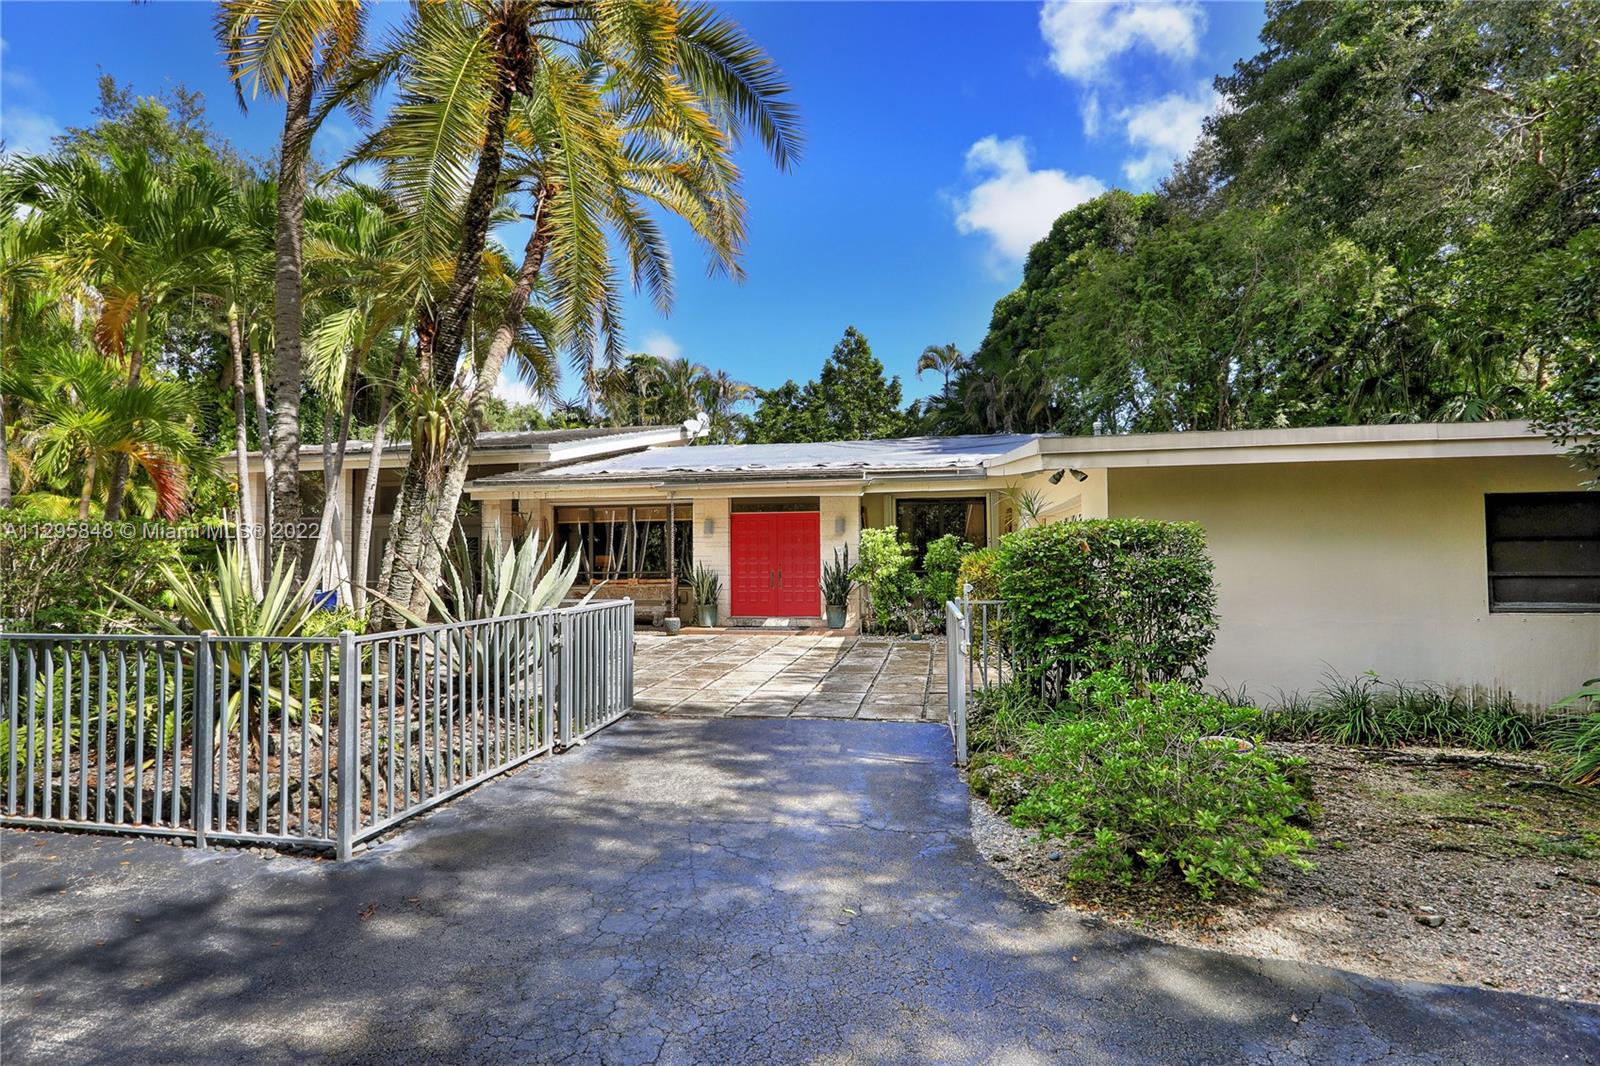 Unique opportunity to restore existing home or build to suit in park-like setting on beautiful street in South Miami.  28,000+ sf of lush grounds with mature canopy.